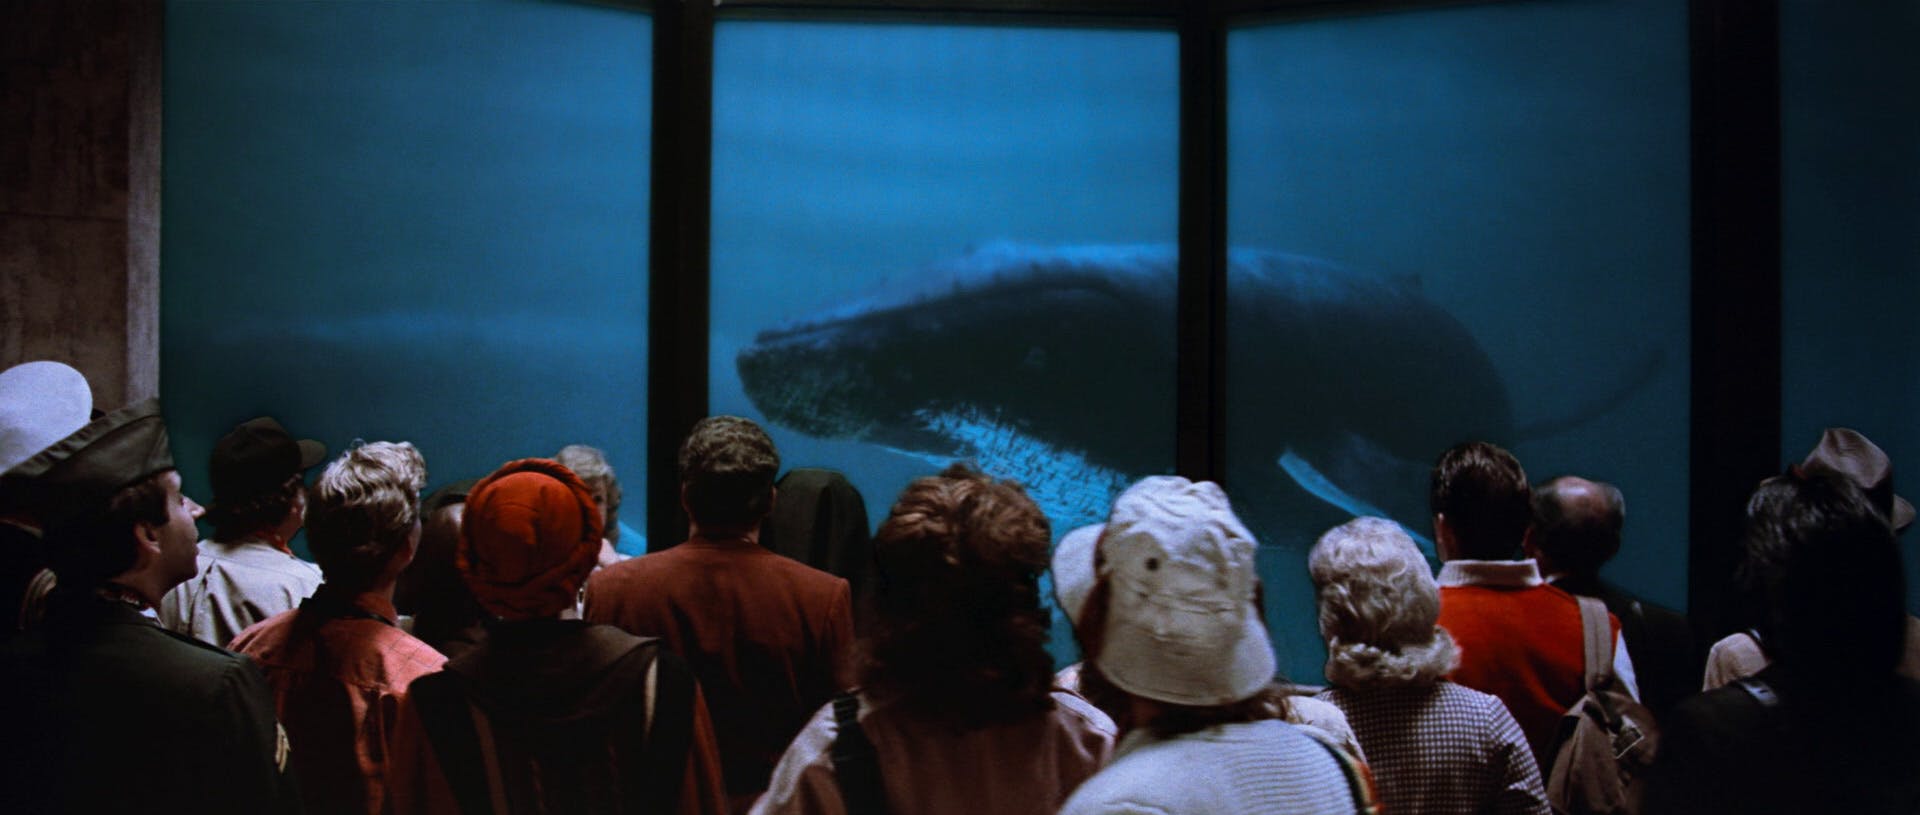 At the Cetacean Institute, Dr. Gillian Taylor escorts a tour group to the Institute's pride and joy, the only two humpbacks in captivity, named George and Gracie in Star Trek IV: The Voyage Home